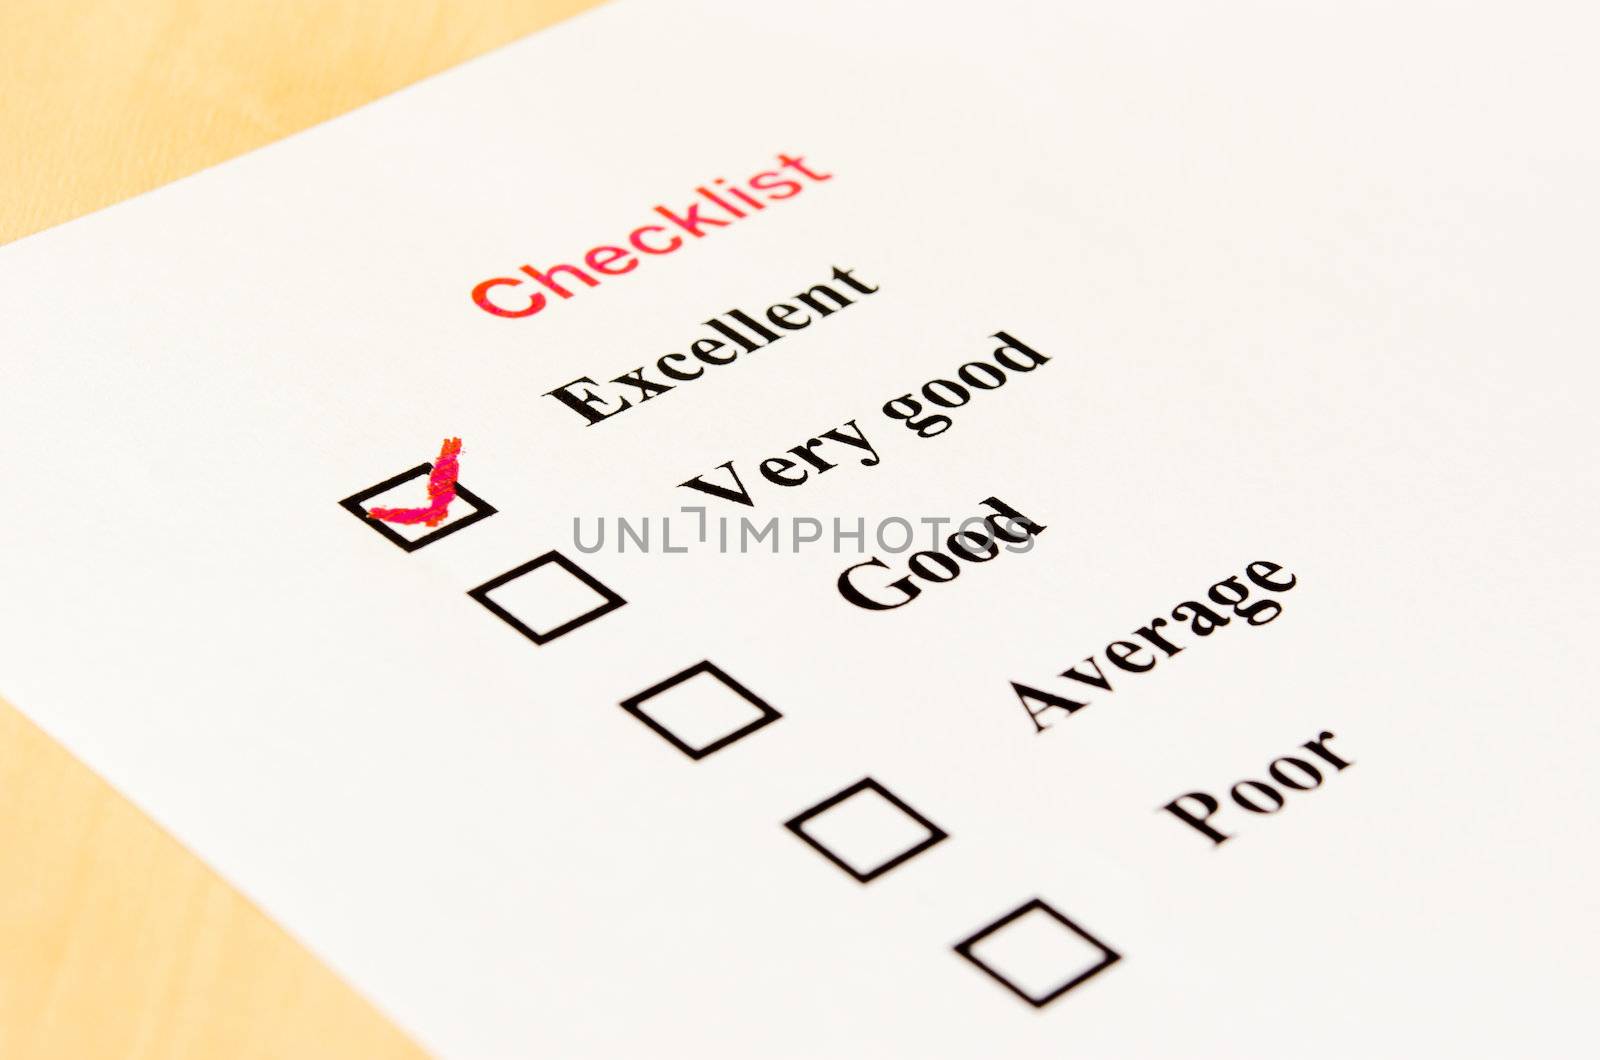 Check list form with check boxes and a red